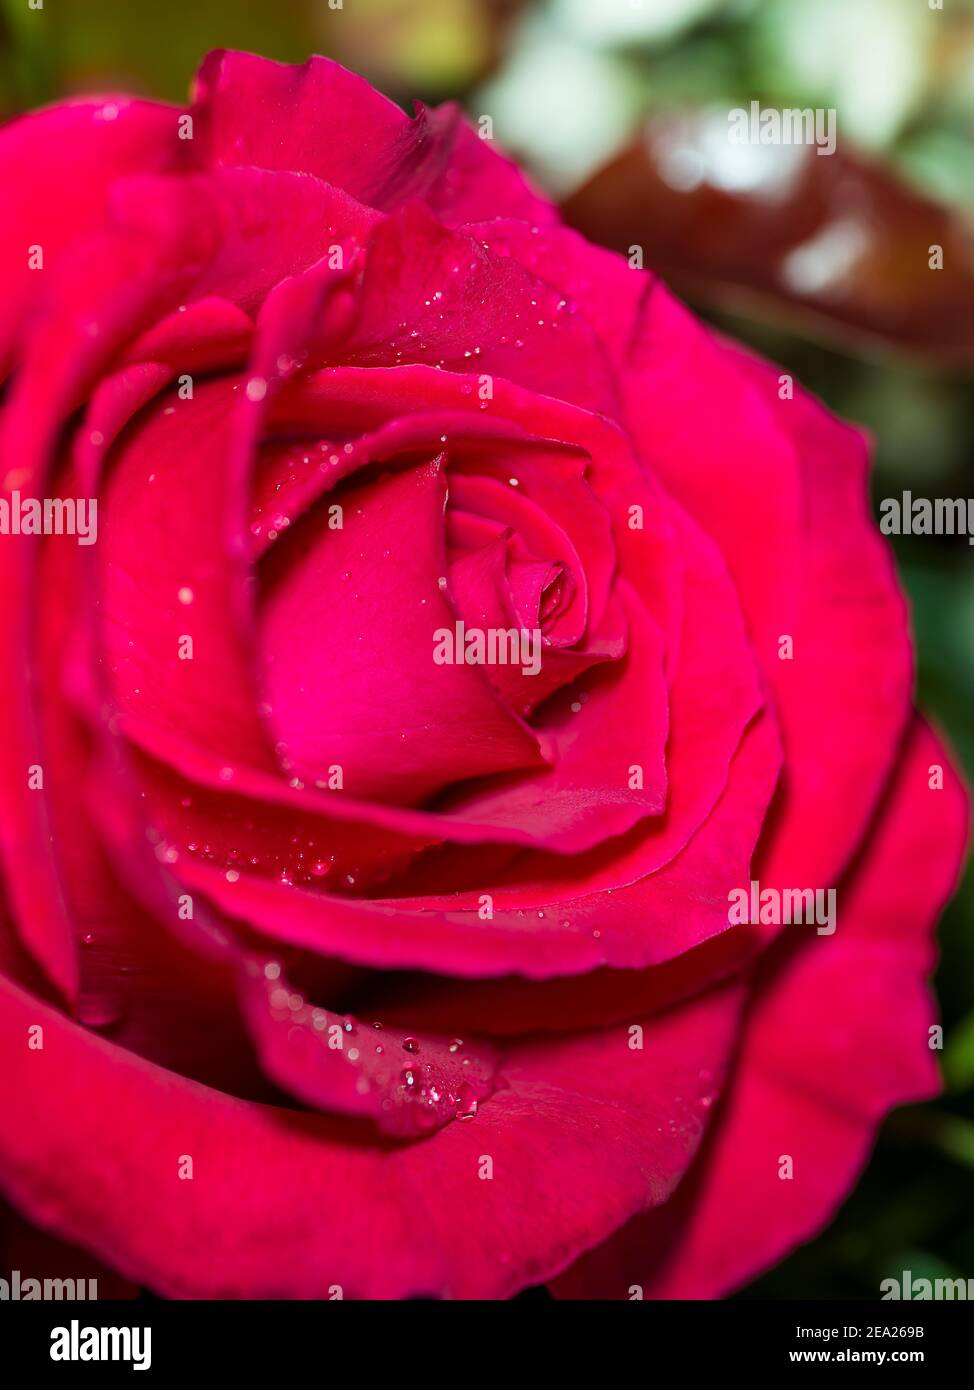 closeup of red rose with water droplets Stock Photo